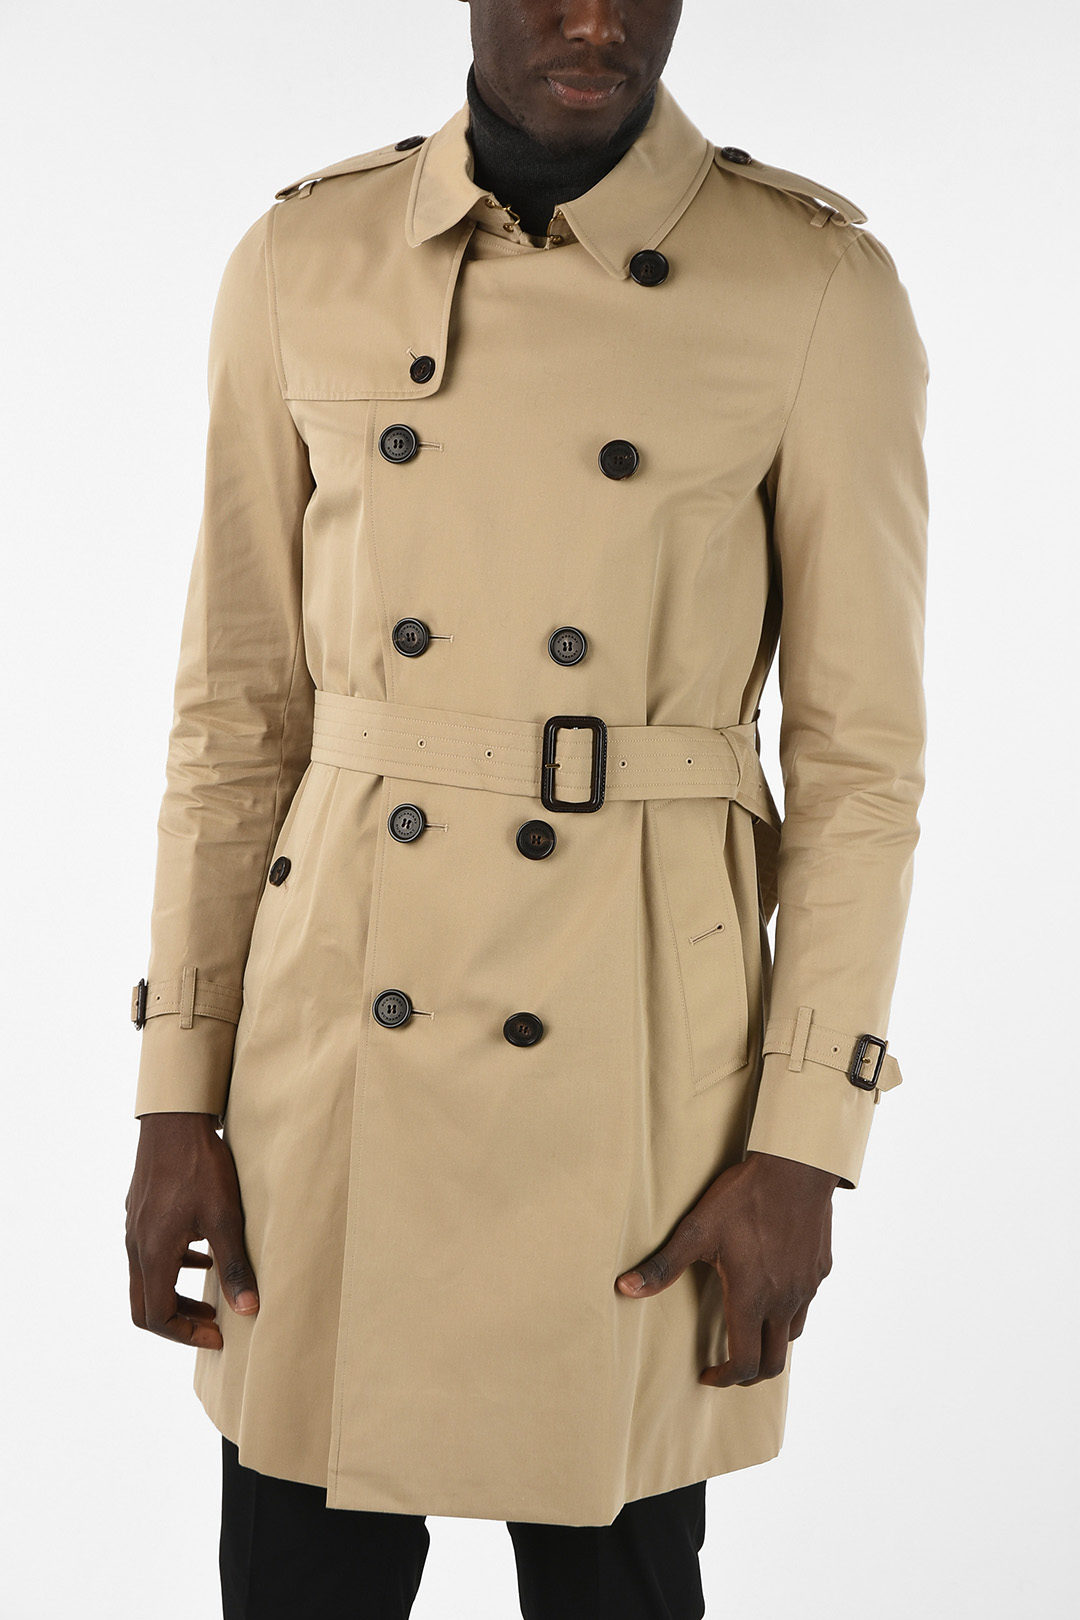 Burberry Double Breasted the sandrigham Trench men - Glamood Outlet